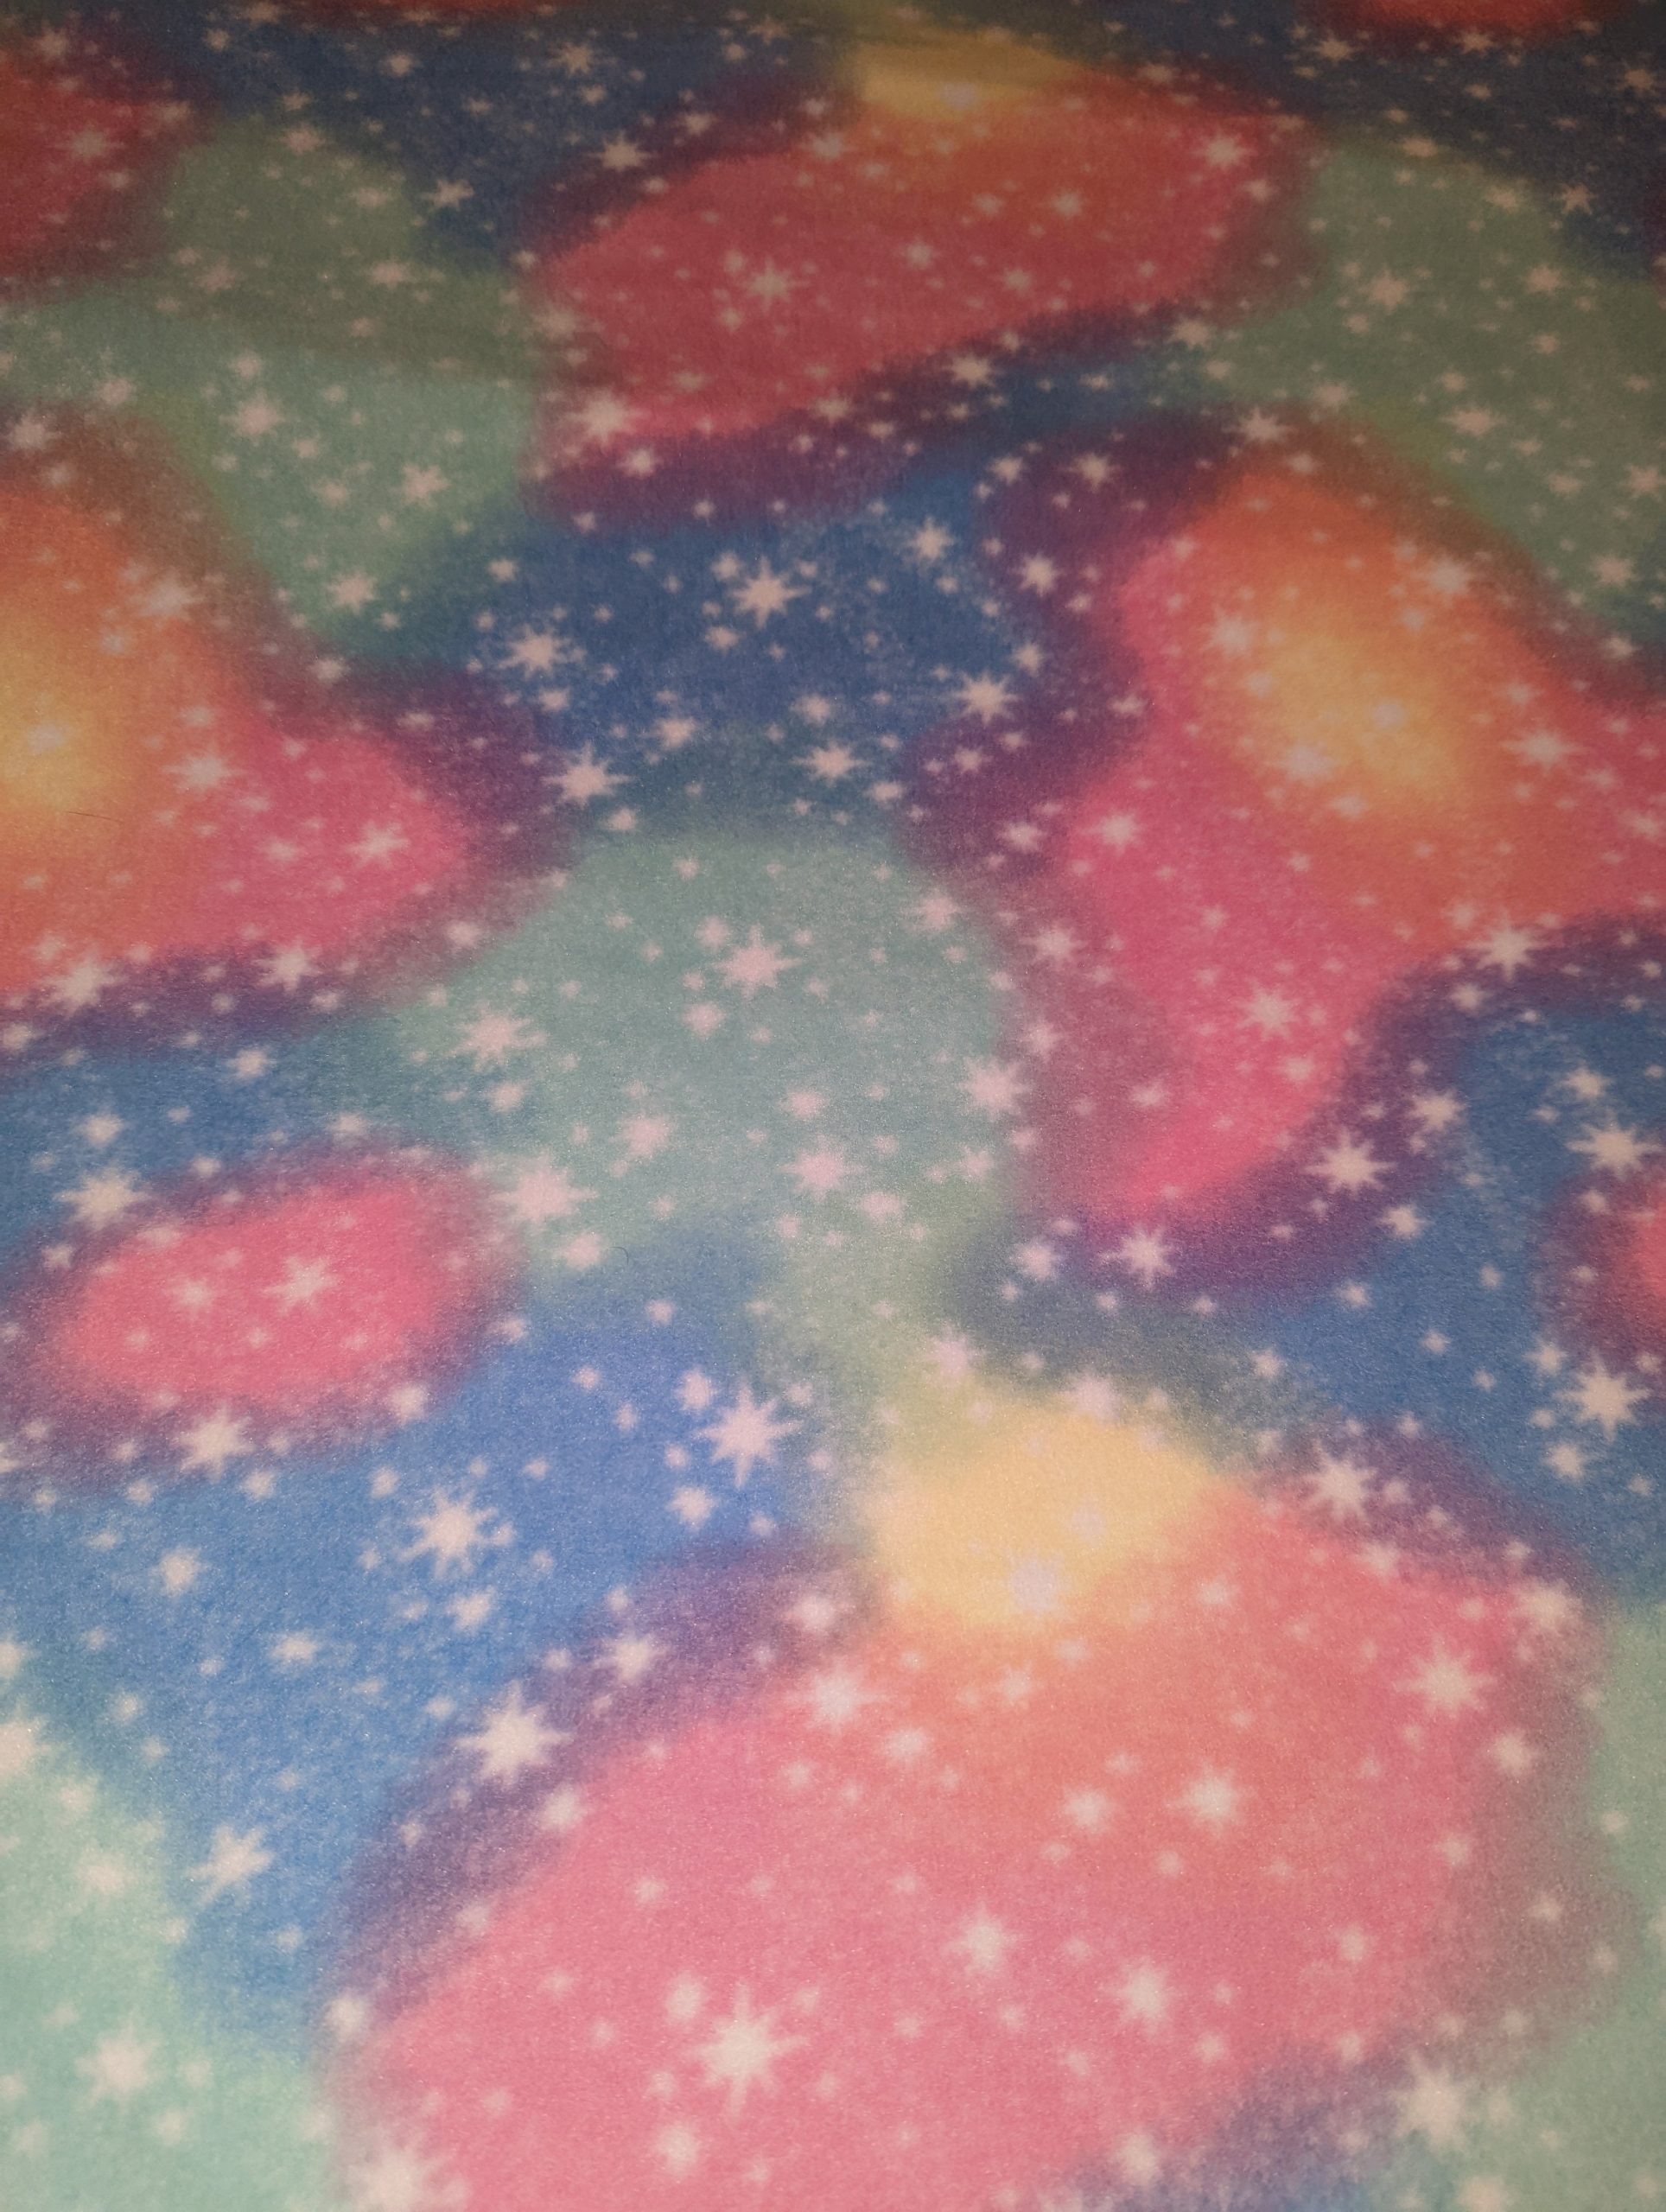 Cotton Candy Sky Galaxy Rainbow Igloo Cover for Hedgehogs, Guinea Pigs, Rats, Ferrets, Degus and many small pets